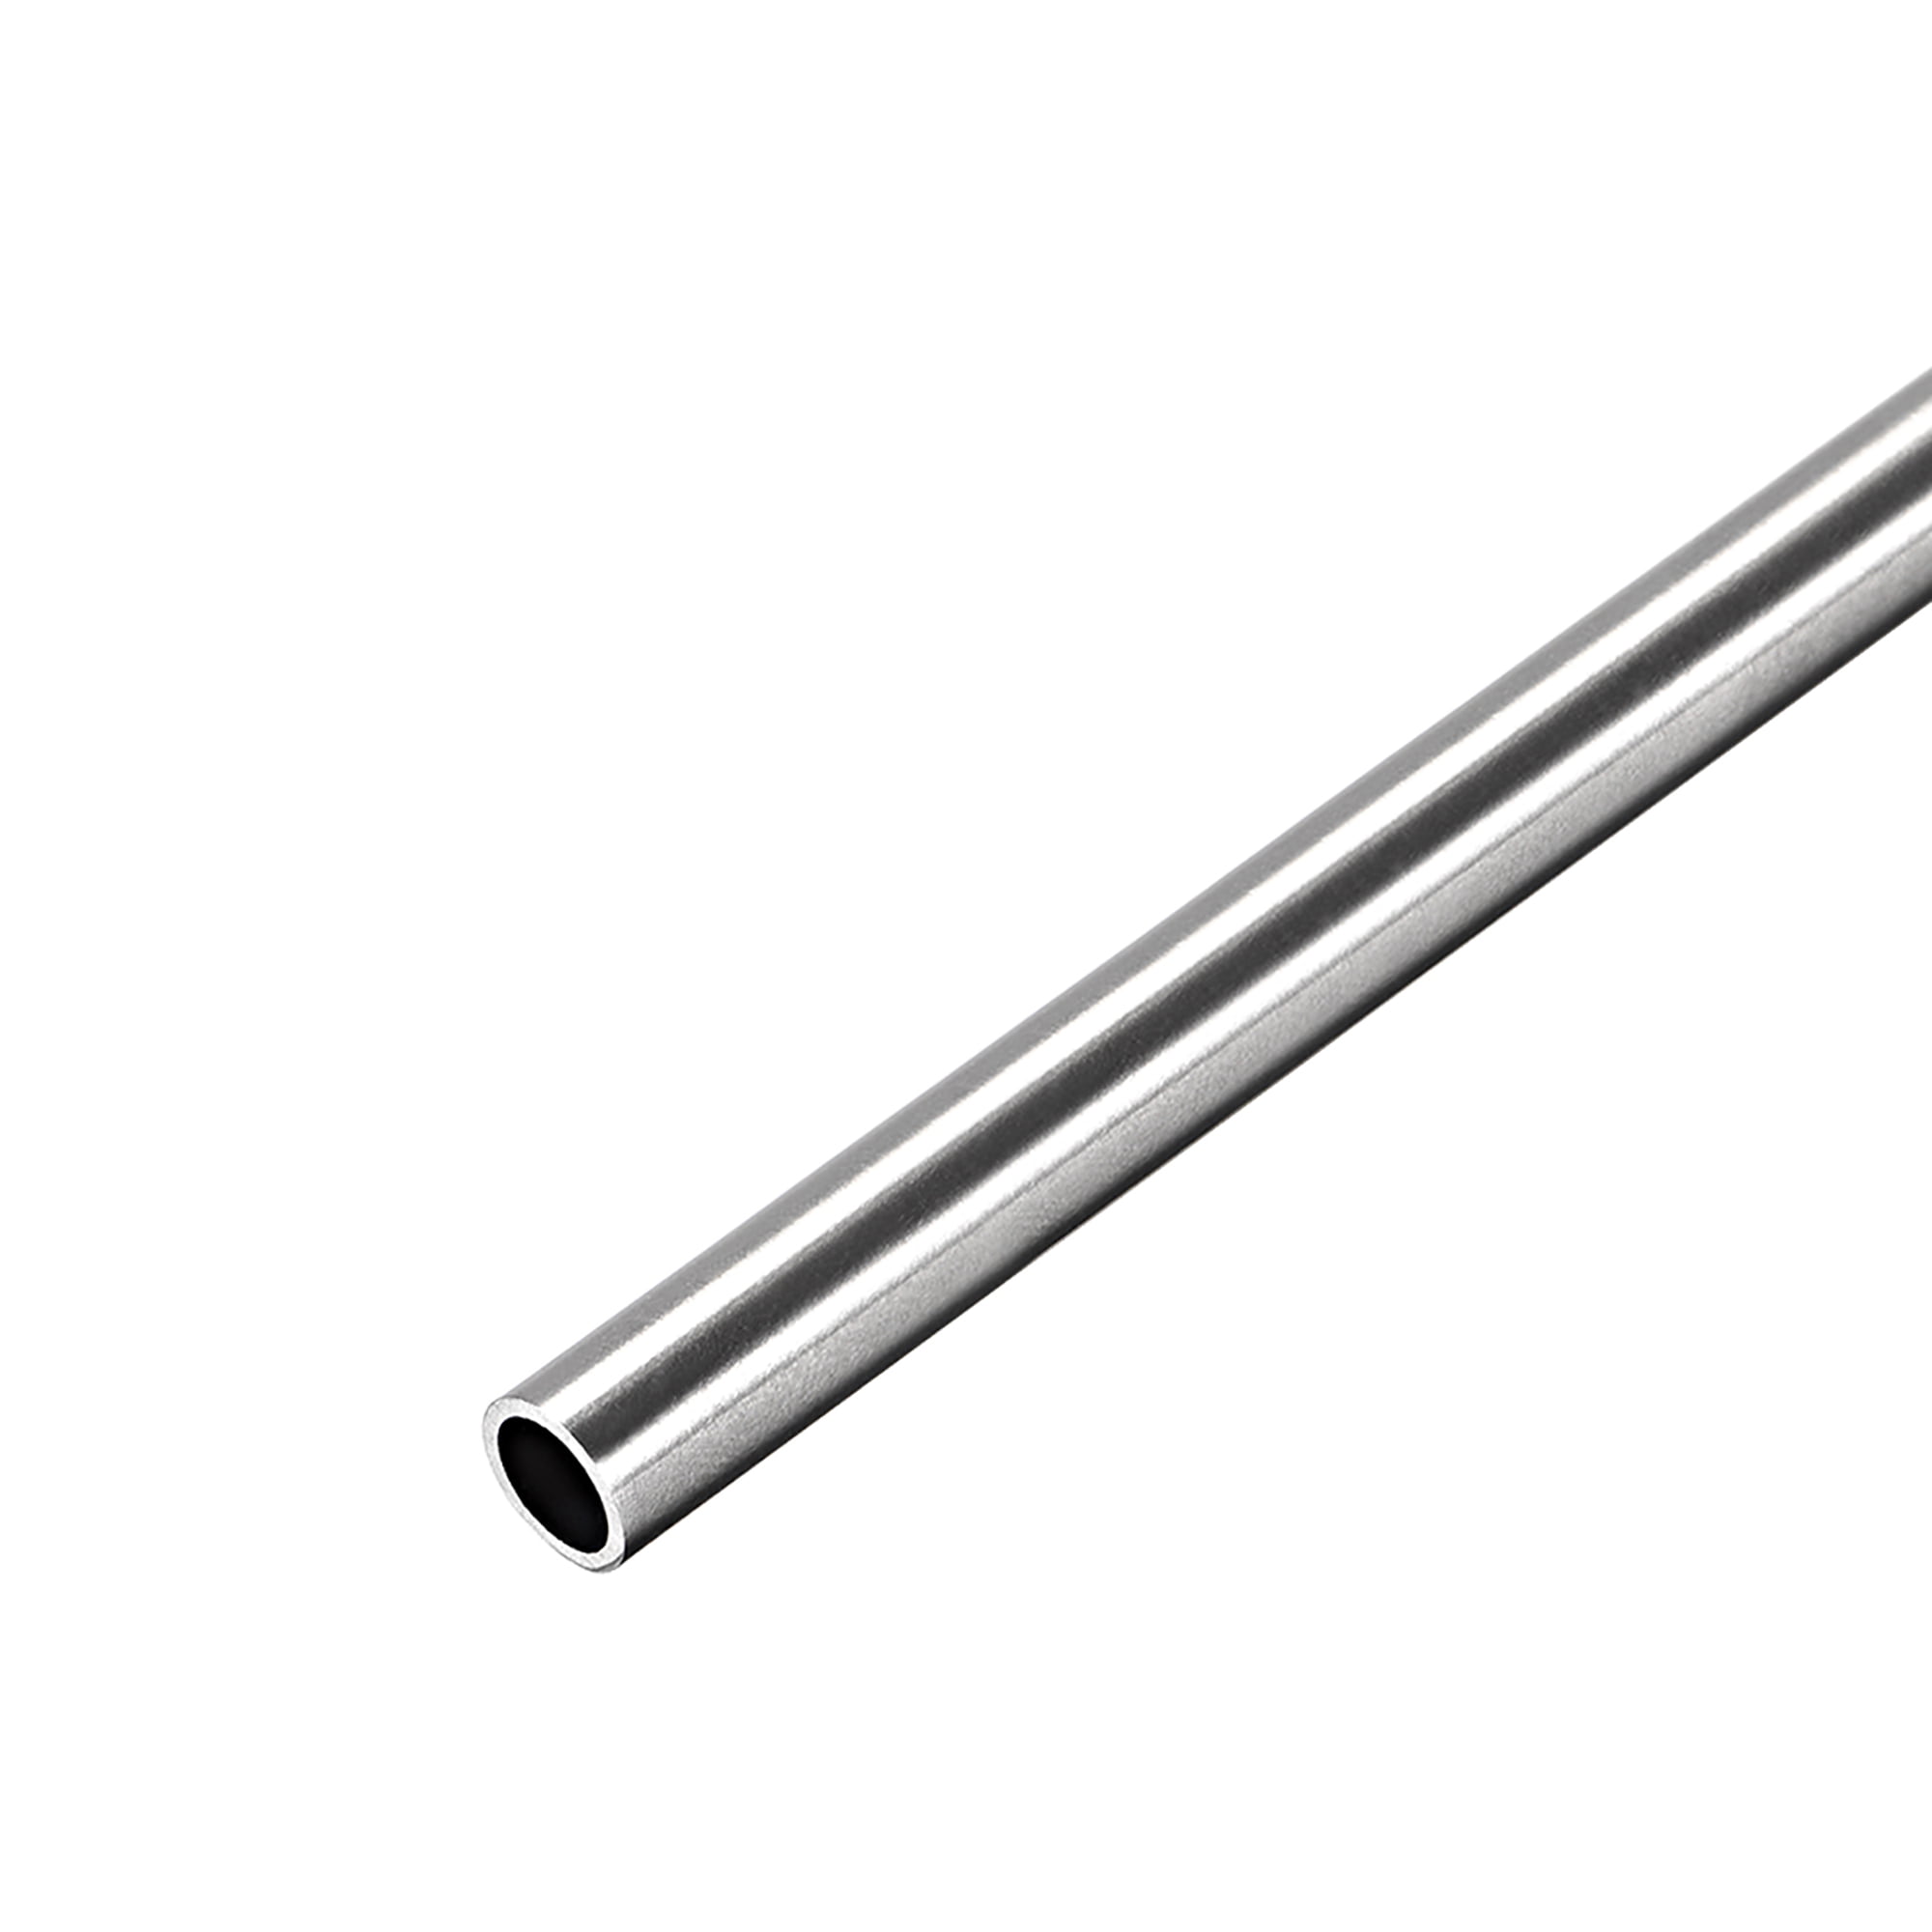 304 Stainless Steel Round Tubing 10mm OD 0.4mm Wall Thickness 250mm Length 4 Pcs